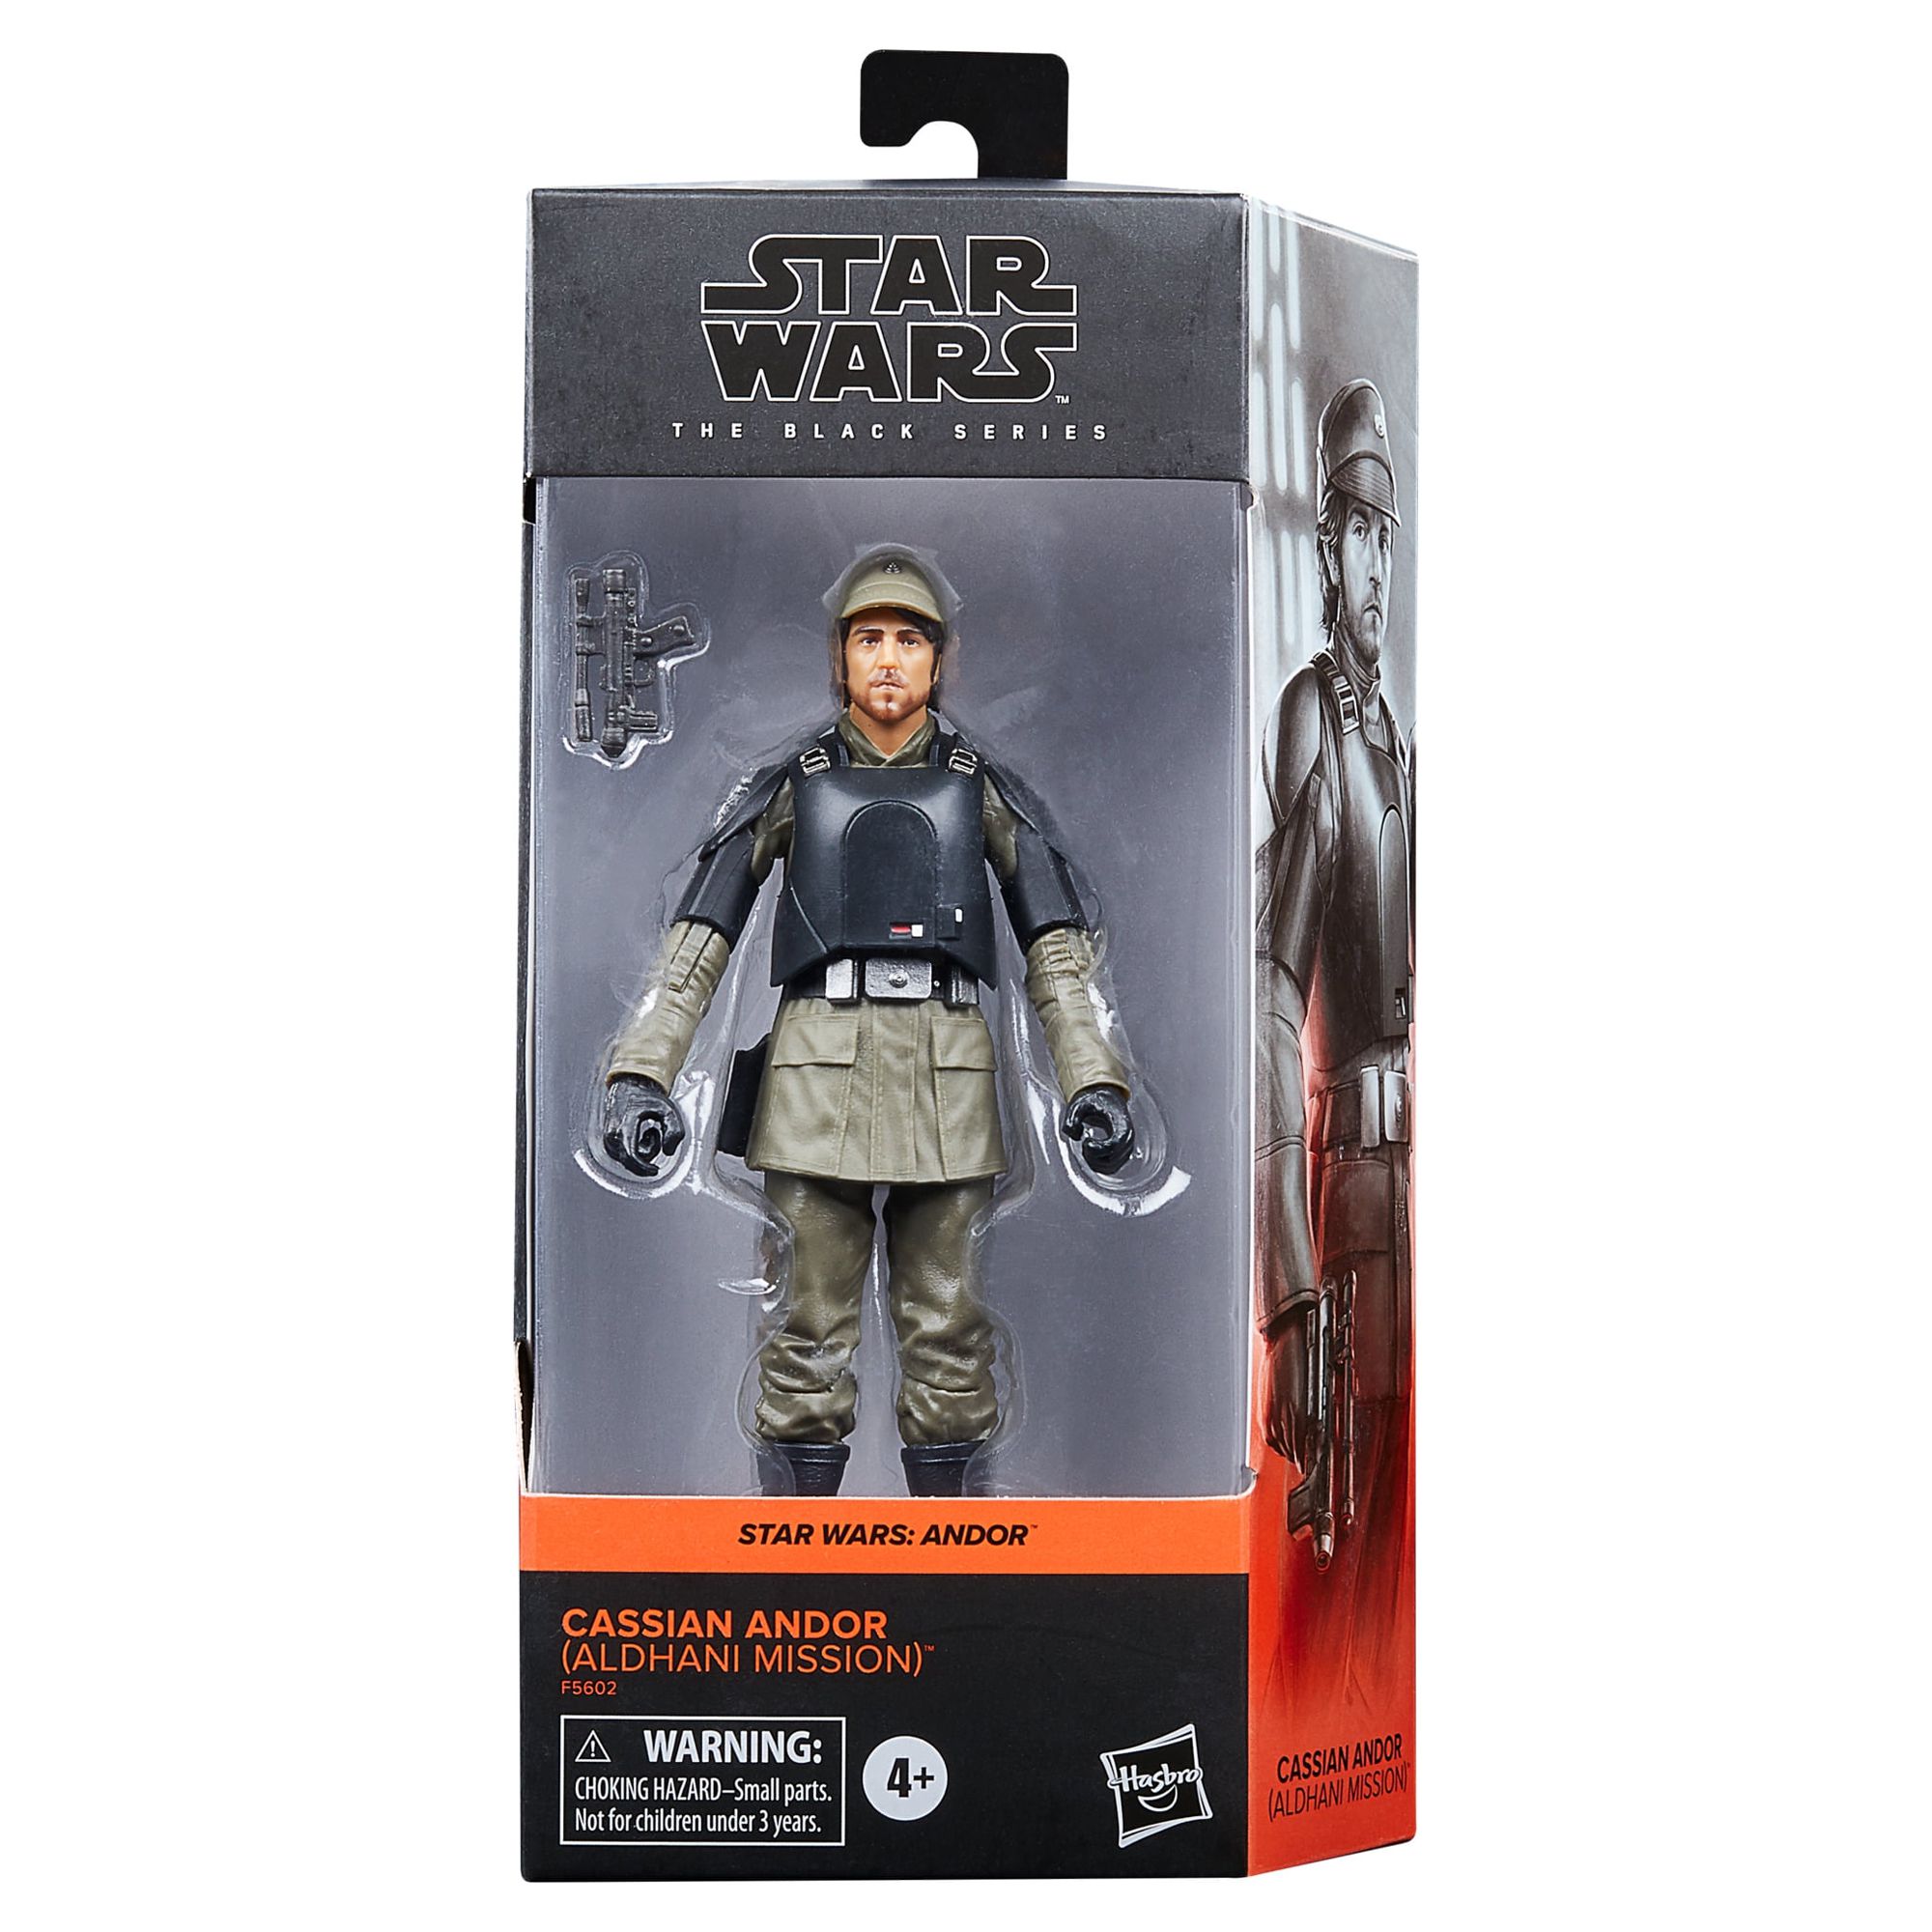 Star Wars: the Black Series Cassian Andor (Aldhani Mission) Kids Toy Action Figure for Boys and Girls Ages 4 5 6 7 8 and Up, Only At Walmart - image 2 of 9